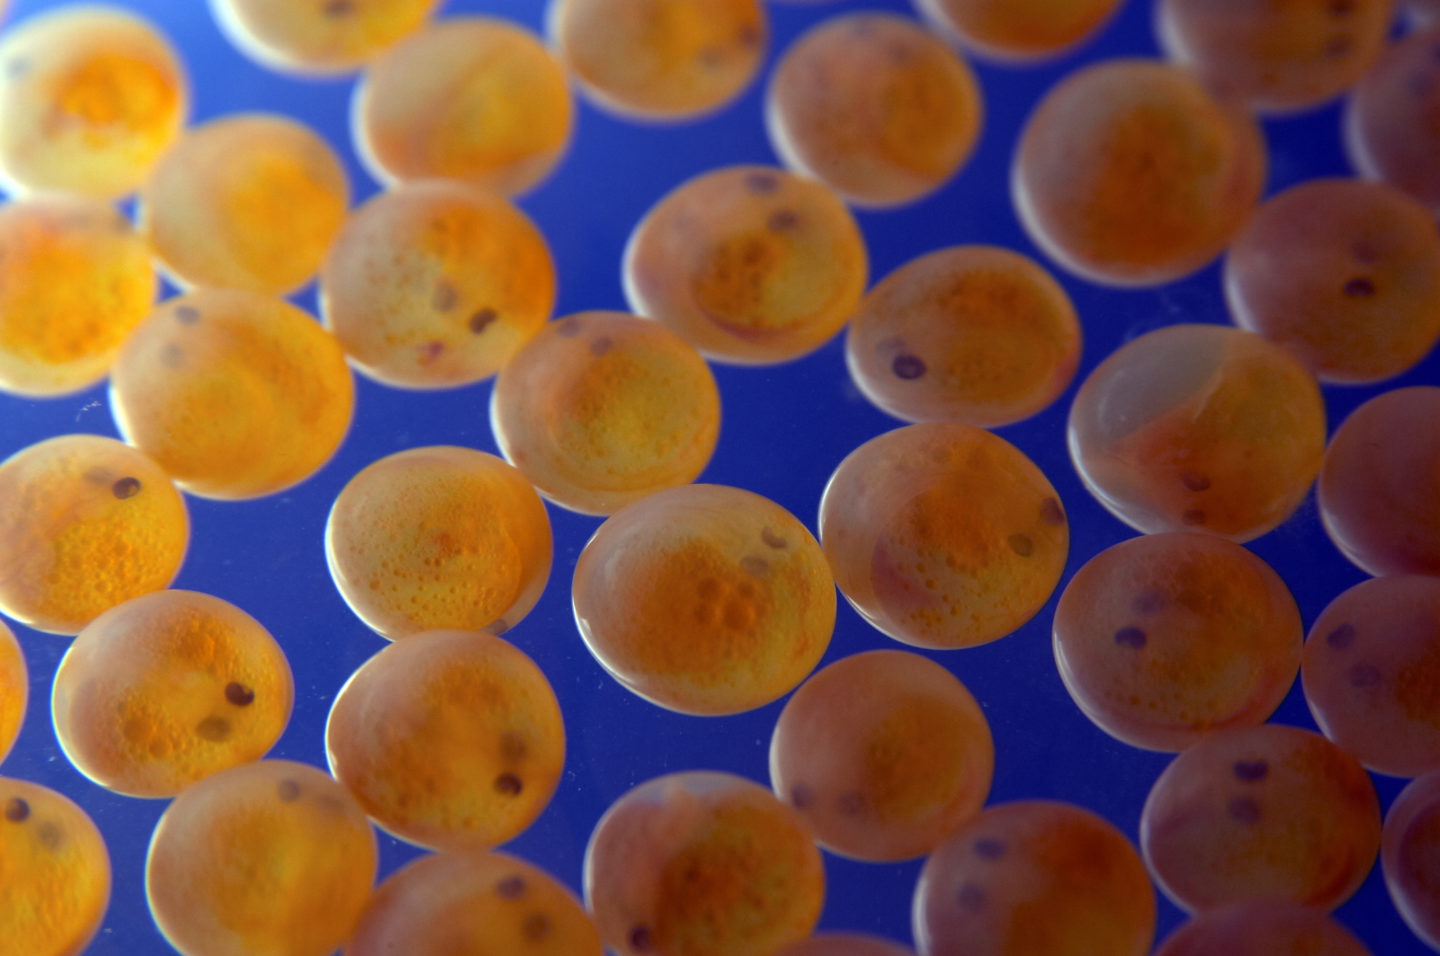 Deadly virus outbreak prompted fears over import of fish farm eggs to Scotland 1